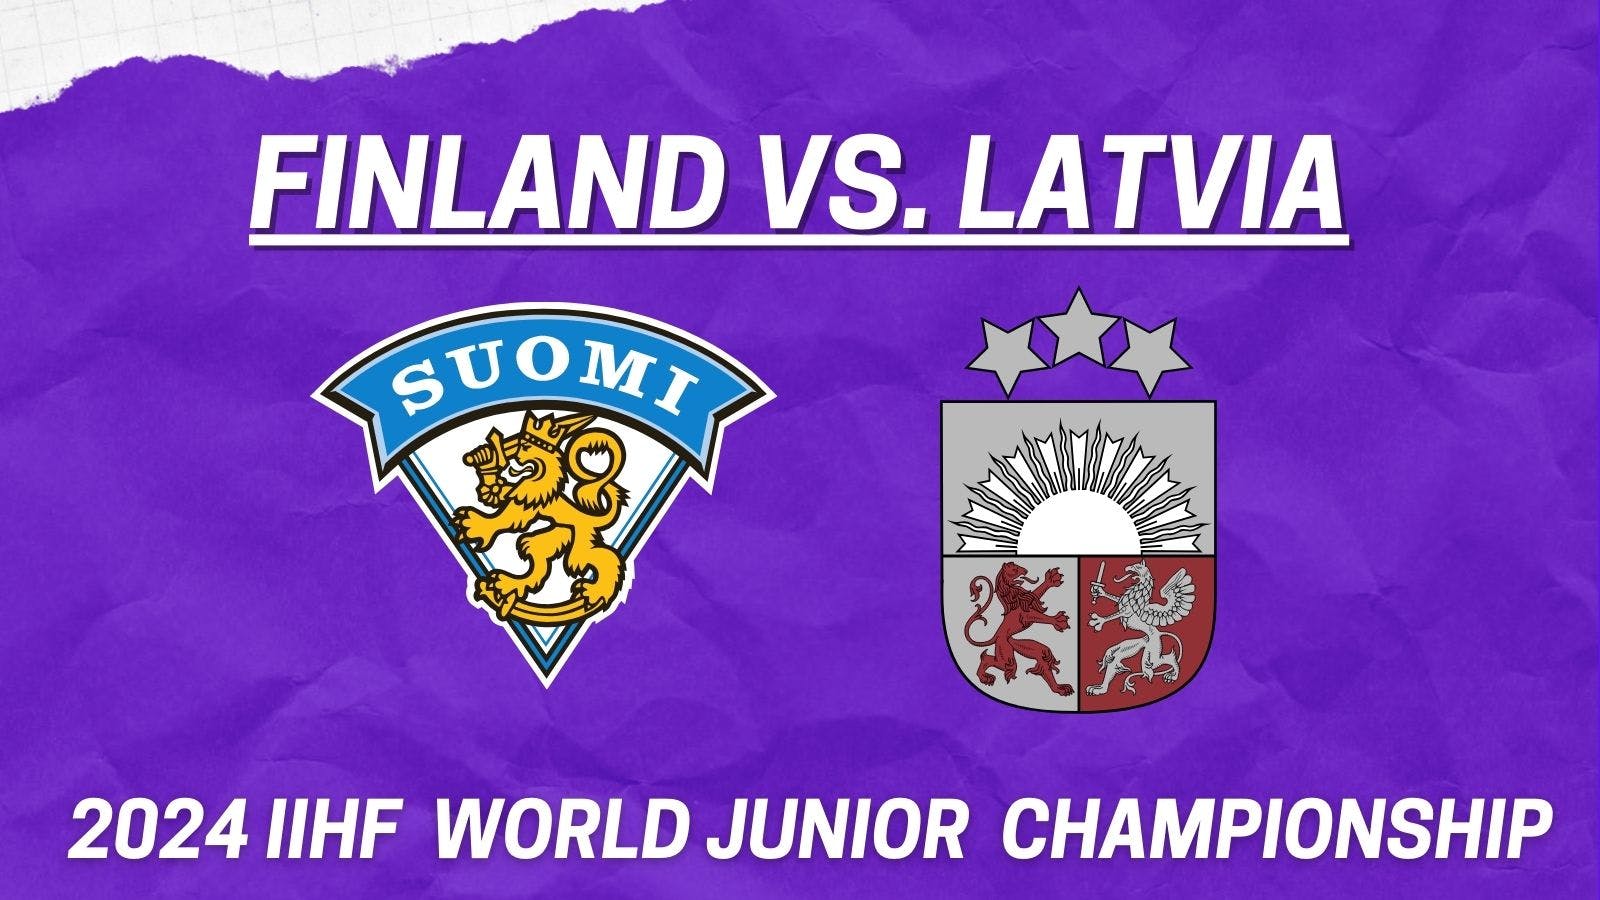 Top standouts from Finland vs. Latvia at 2024 World Junior Championship